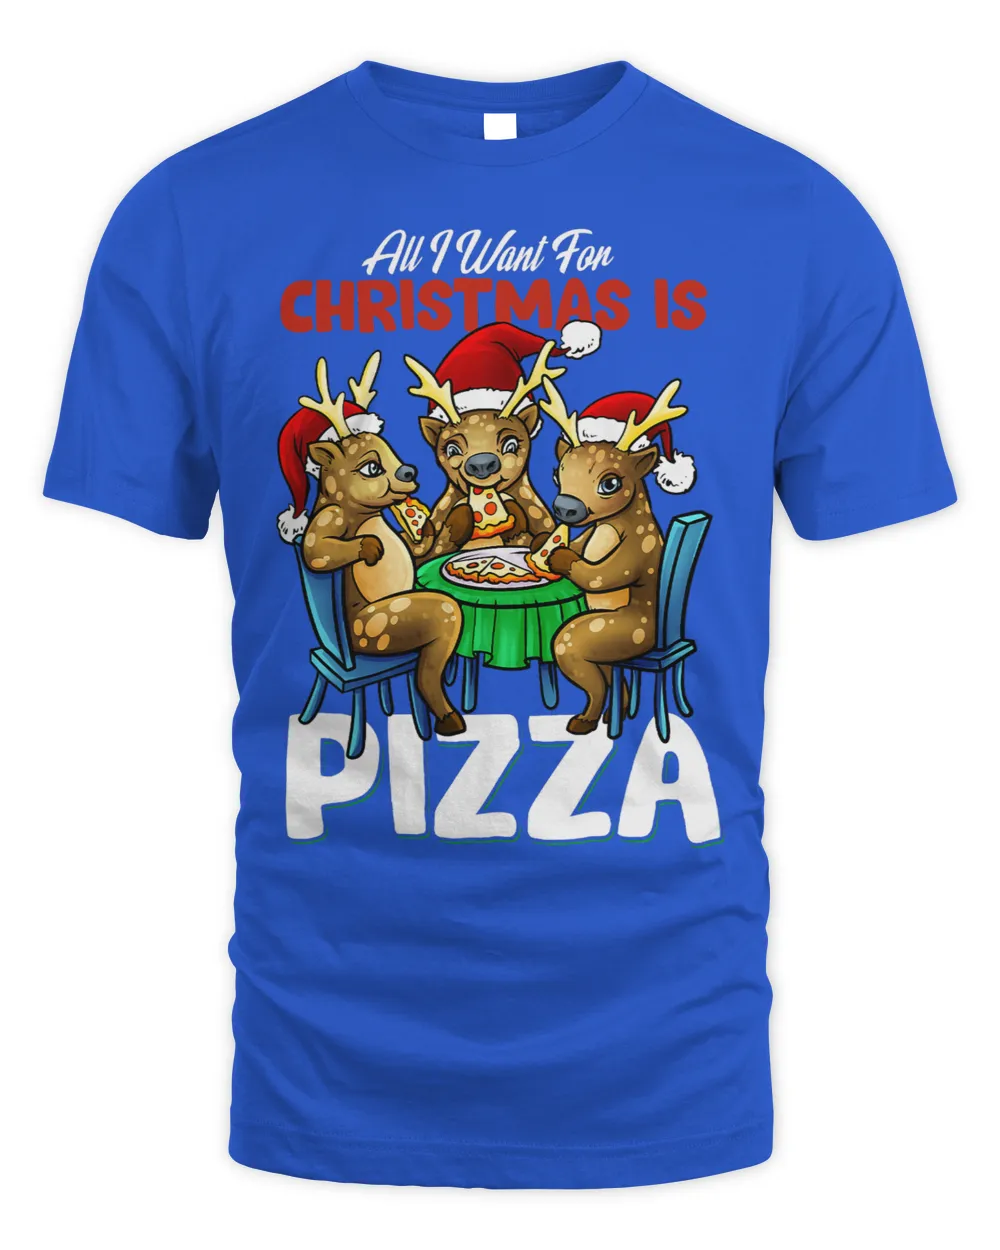 All I Want for Christmas is Pizza Funny Santa Reindeer